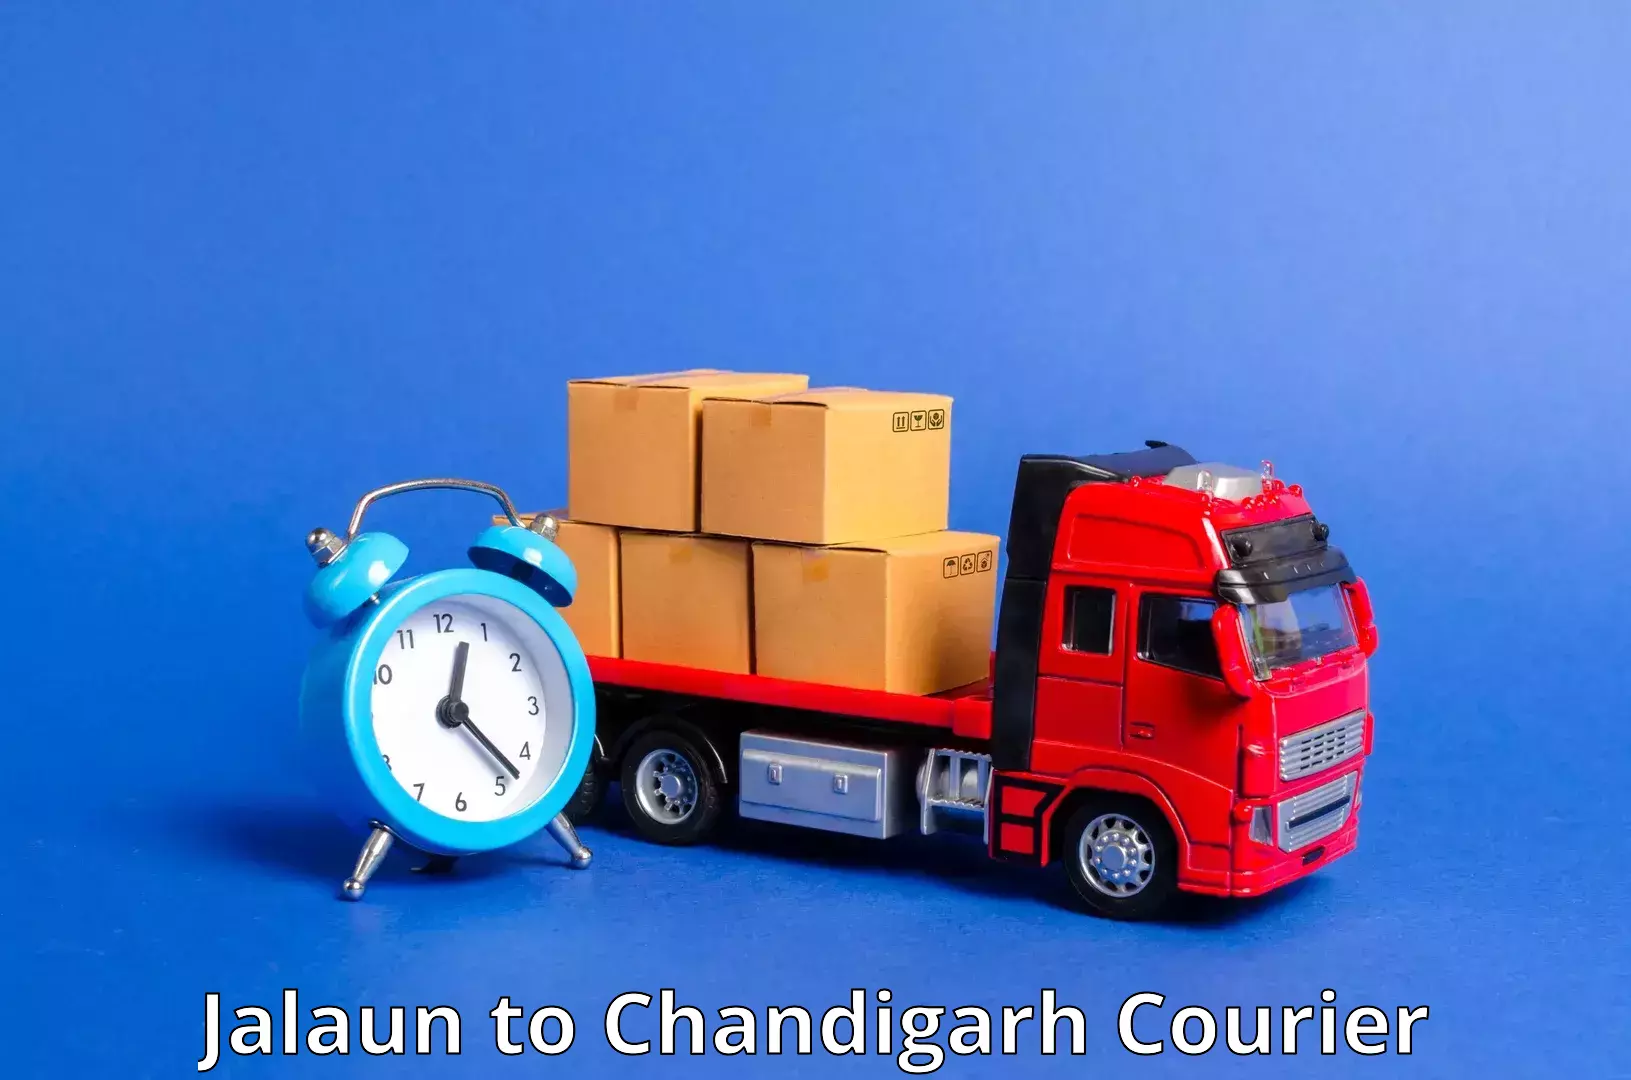 High-priority parcel service Jalaun to Chandigarh